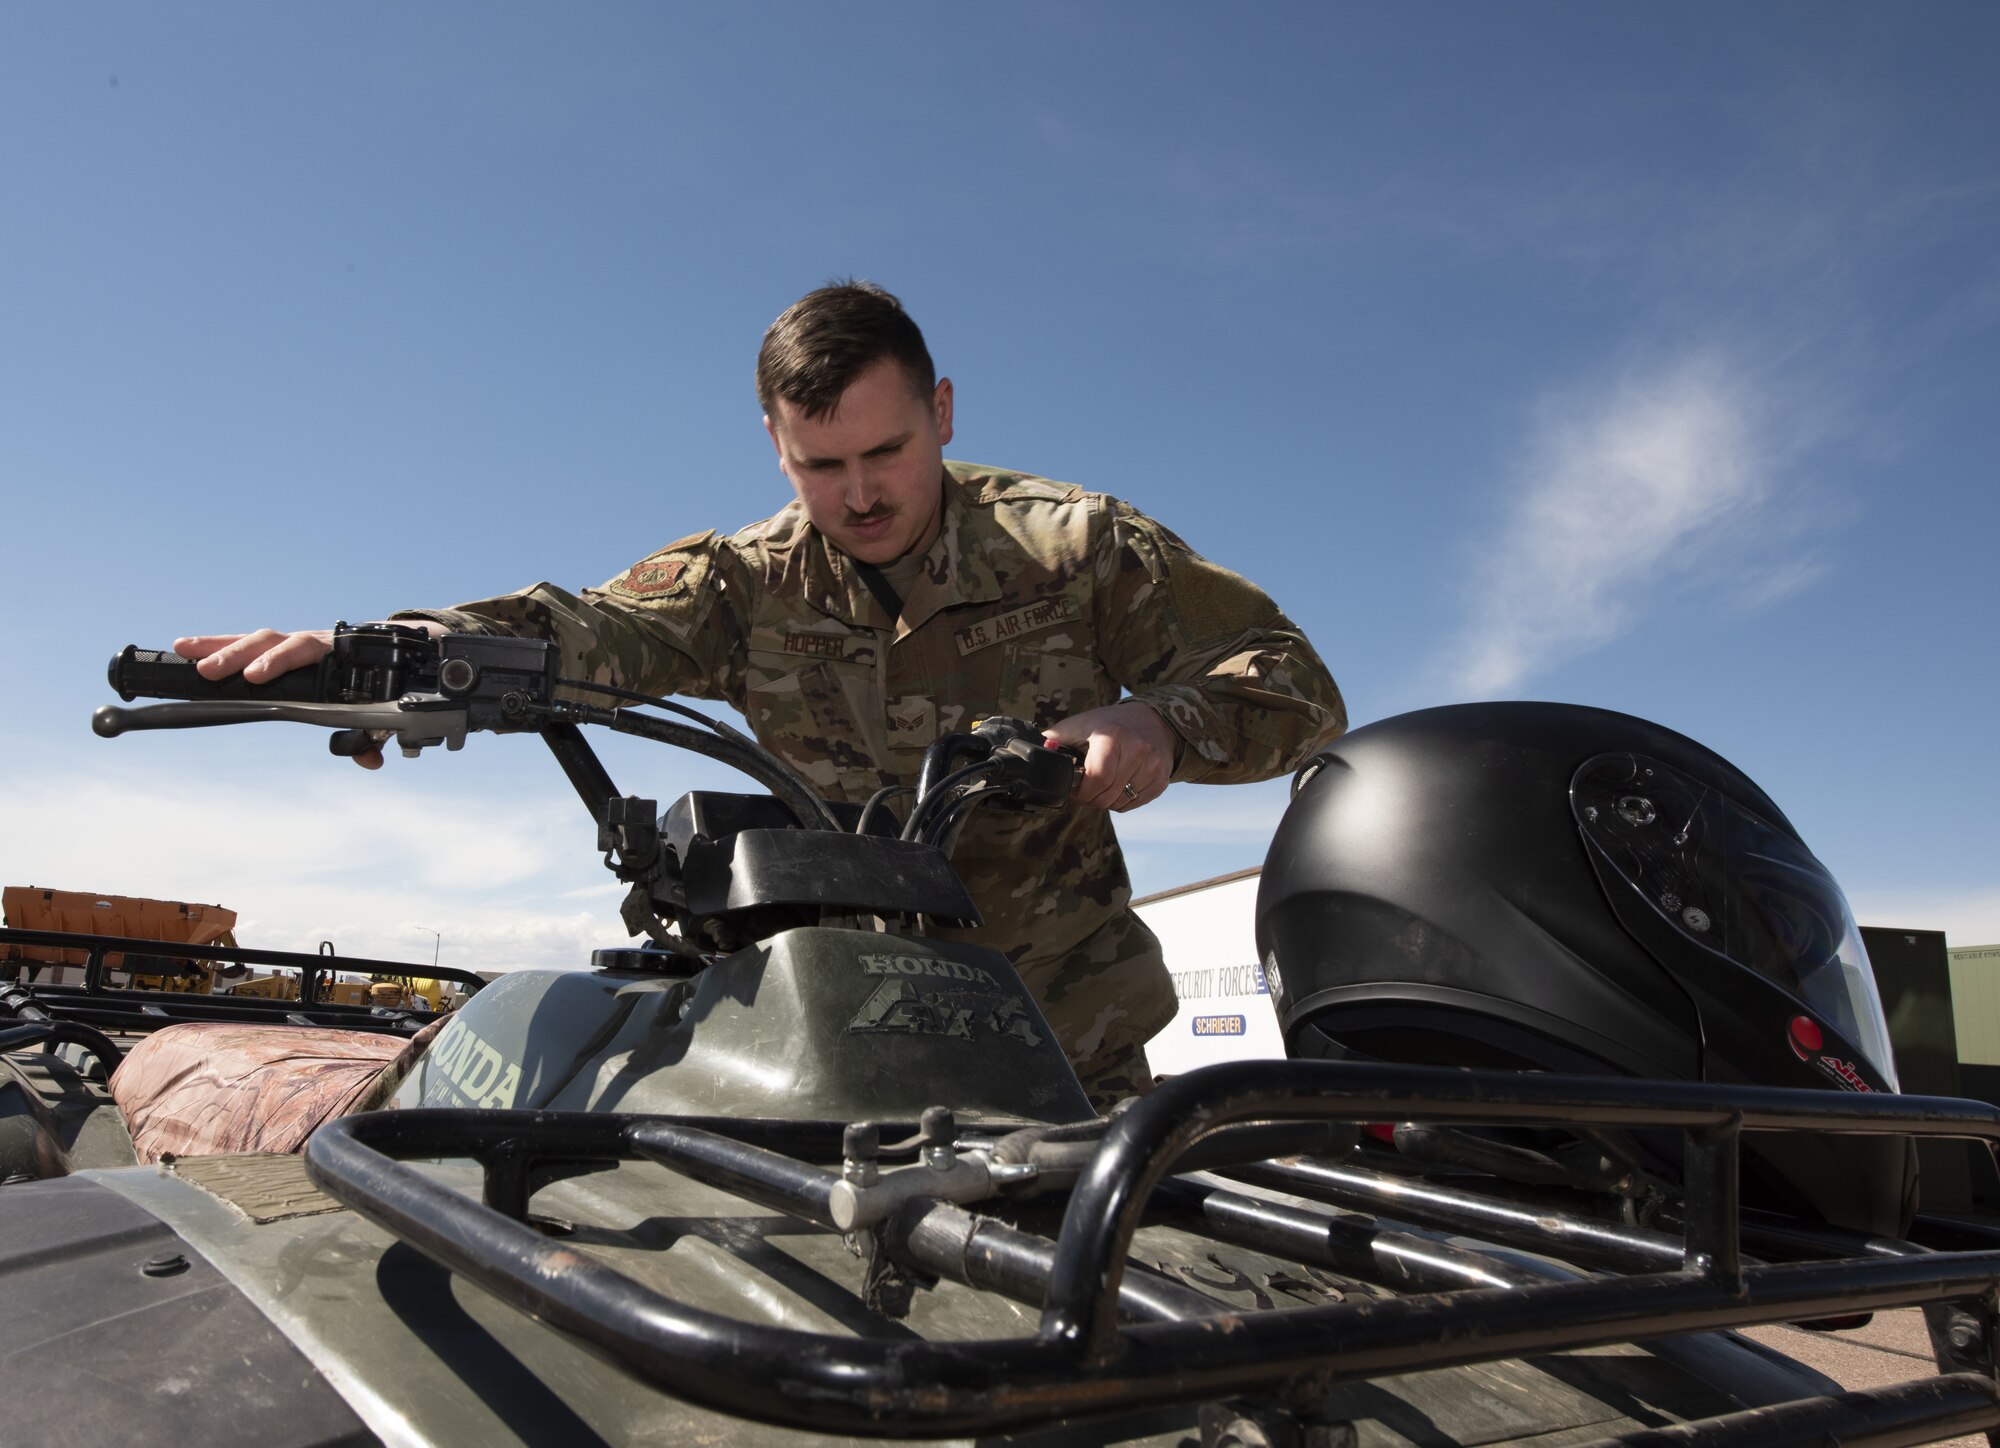 Senior Airman Austin Hopper, 50th Security Force Squadron resource and logistics, conducts a maintenance check on one of the 50th SFS perimeter all-terrain vehicles at the 50th Security Forces logistics facility at Schriever Air Force Base, Colorado, March 11, 2019. The logistics flight is responsible for providing and maintaining all vehicle assets belonging to the 50th SFS. (U.S. Air Force Photo by Staff Sgt. Matthew Coleman-Foster)